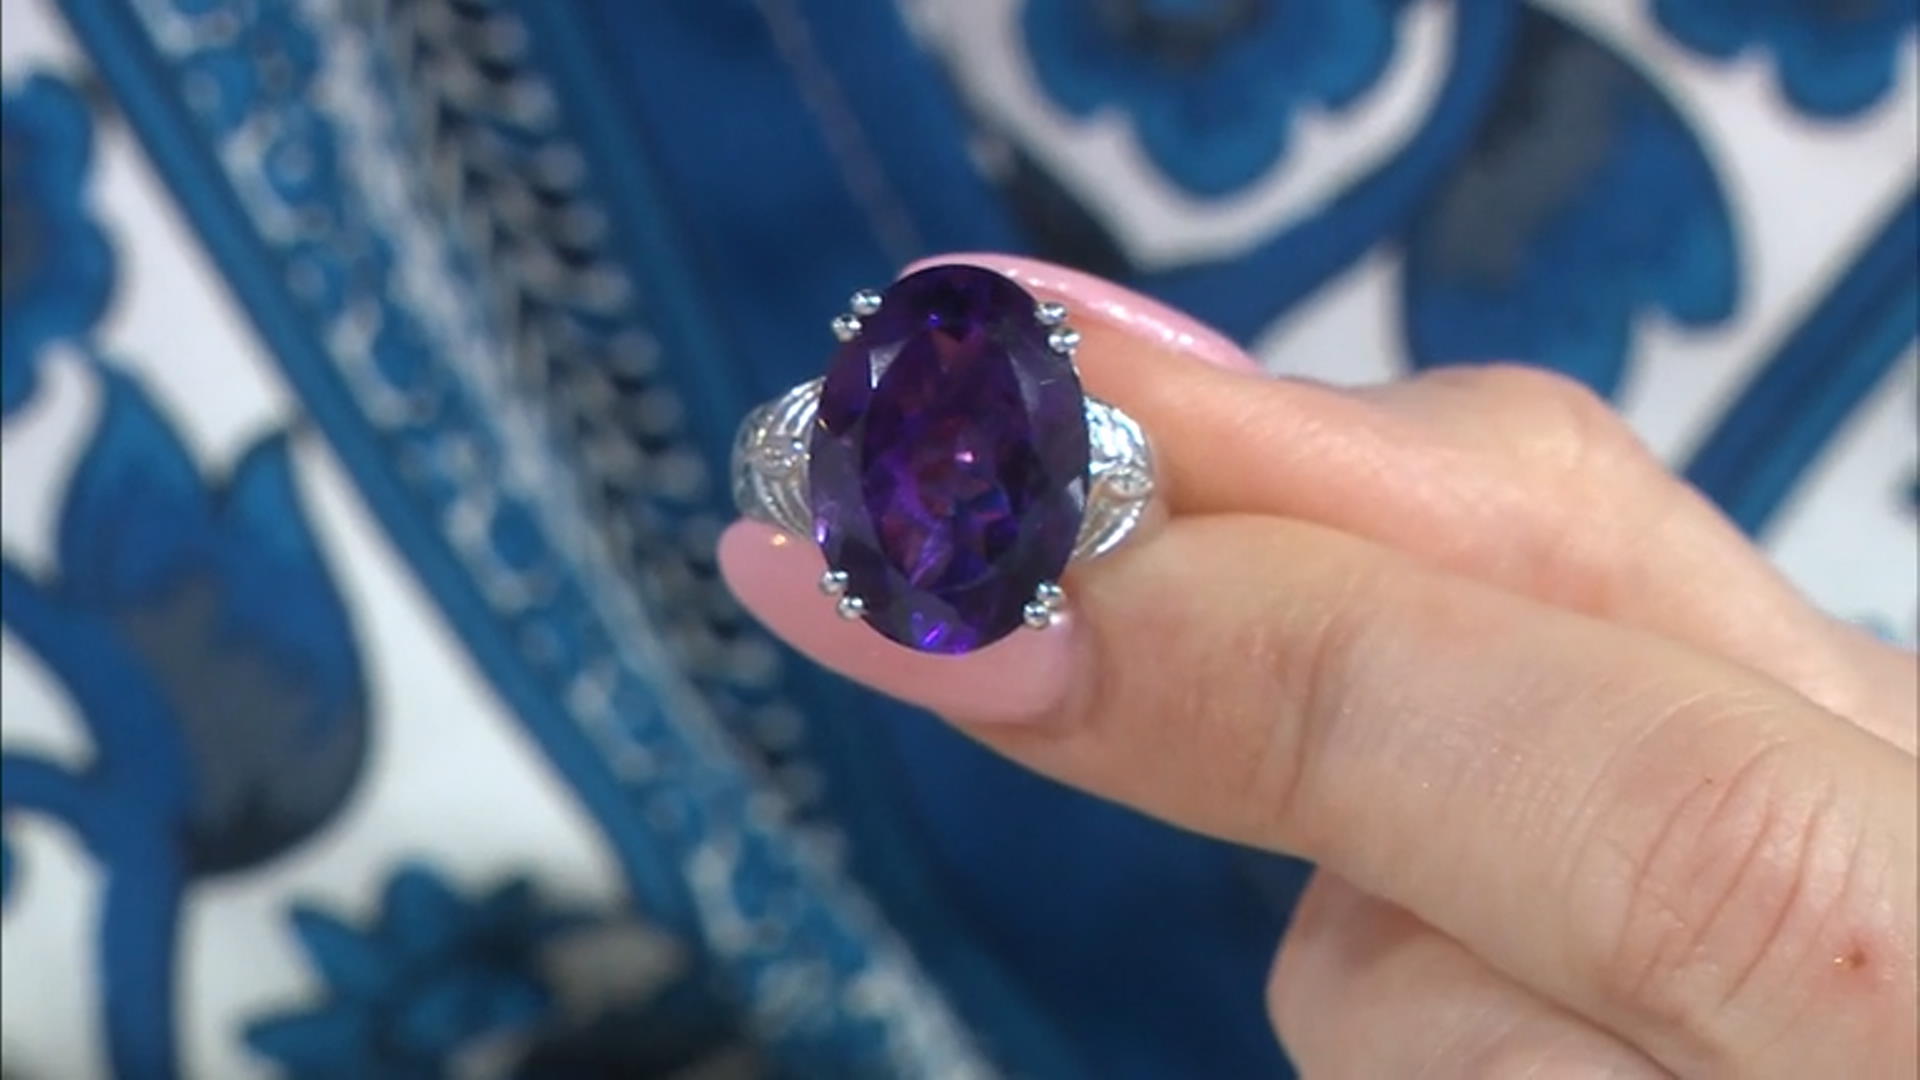 Purple African Amethyst With White Zircon Rhodium Over Sterling Silver Ring 9.22ctw Video Thumbnail